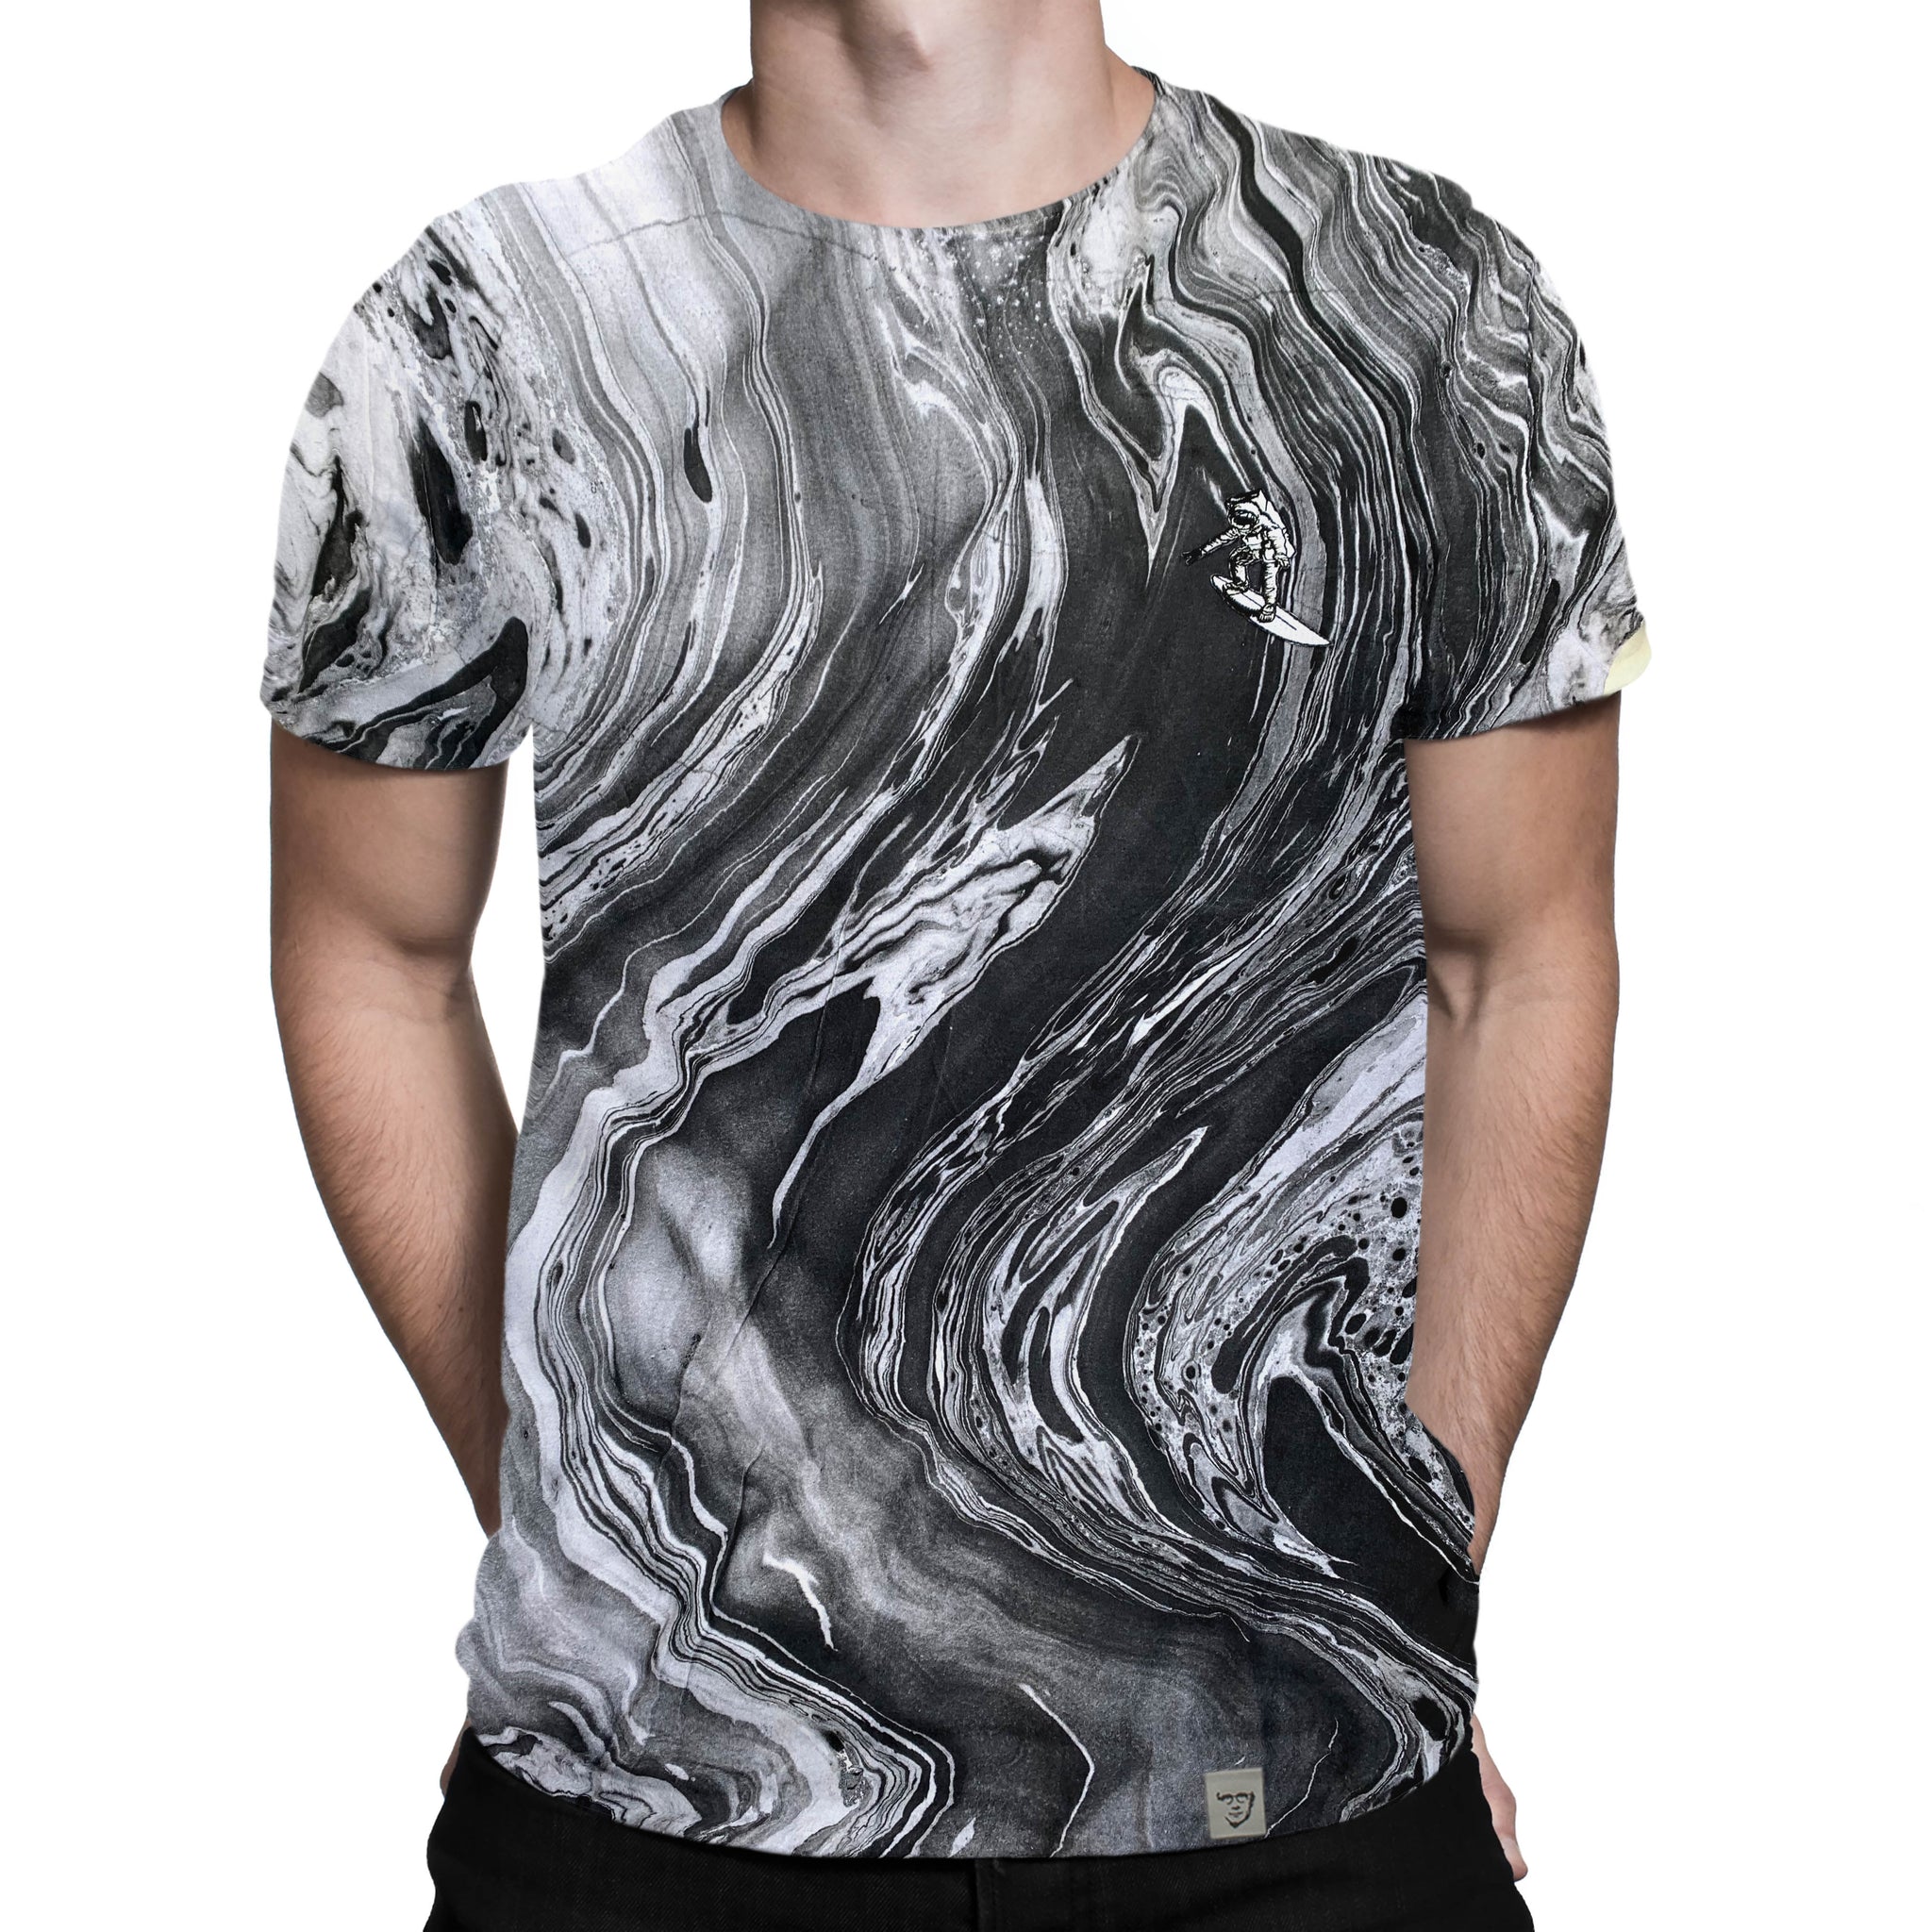 Marble Dye Astro Surfer T – Imaginary Foundation